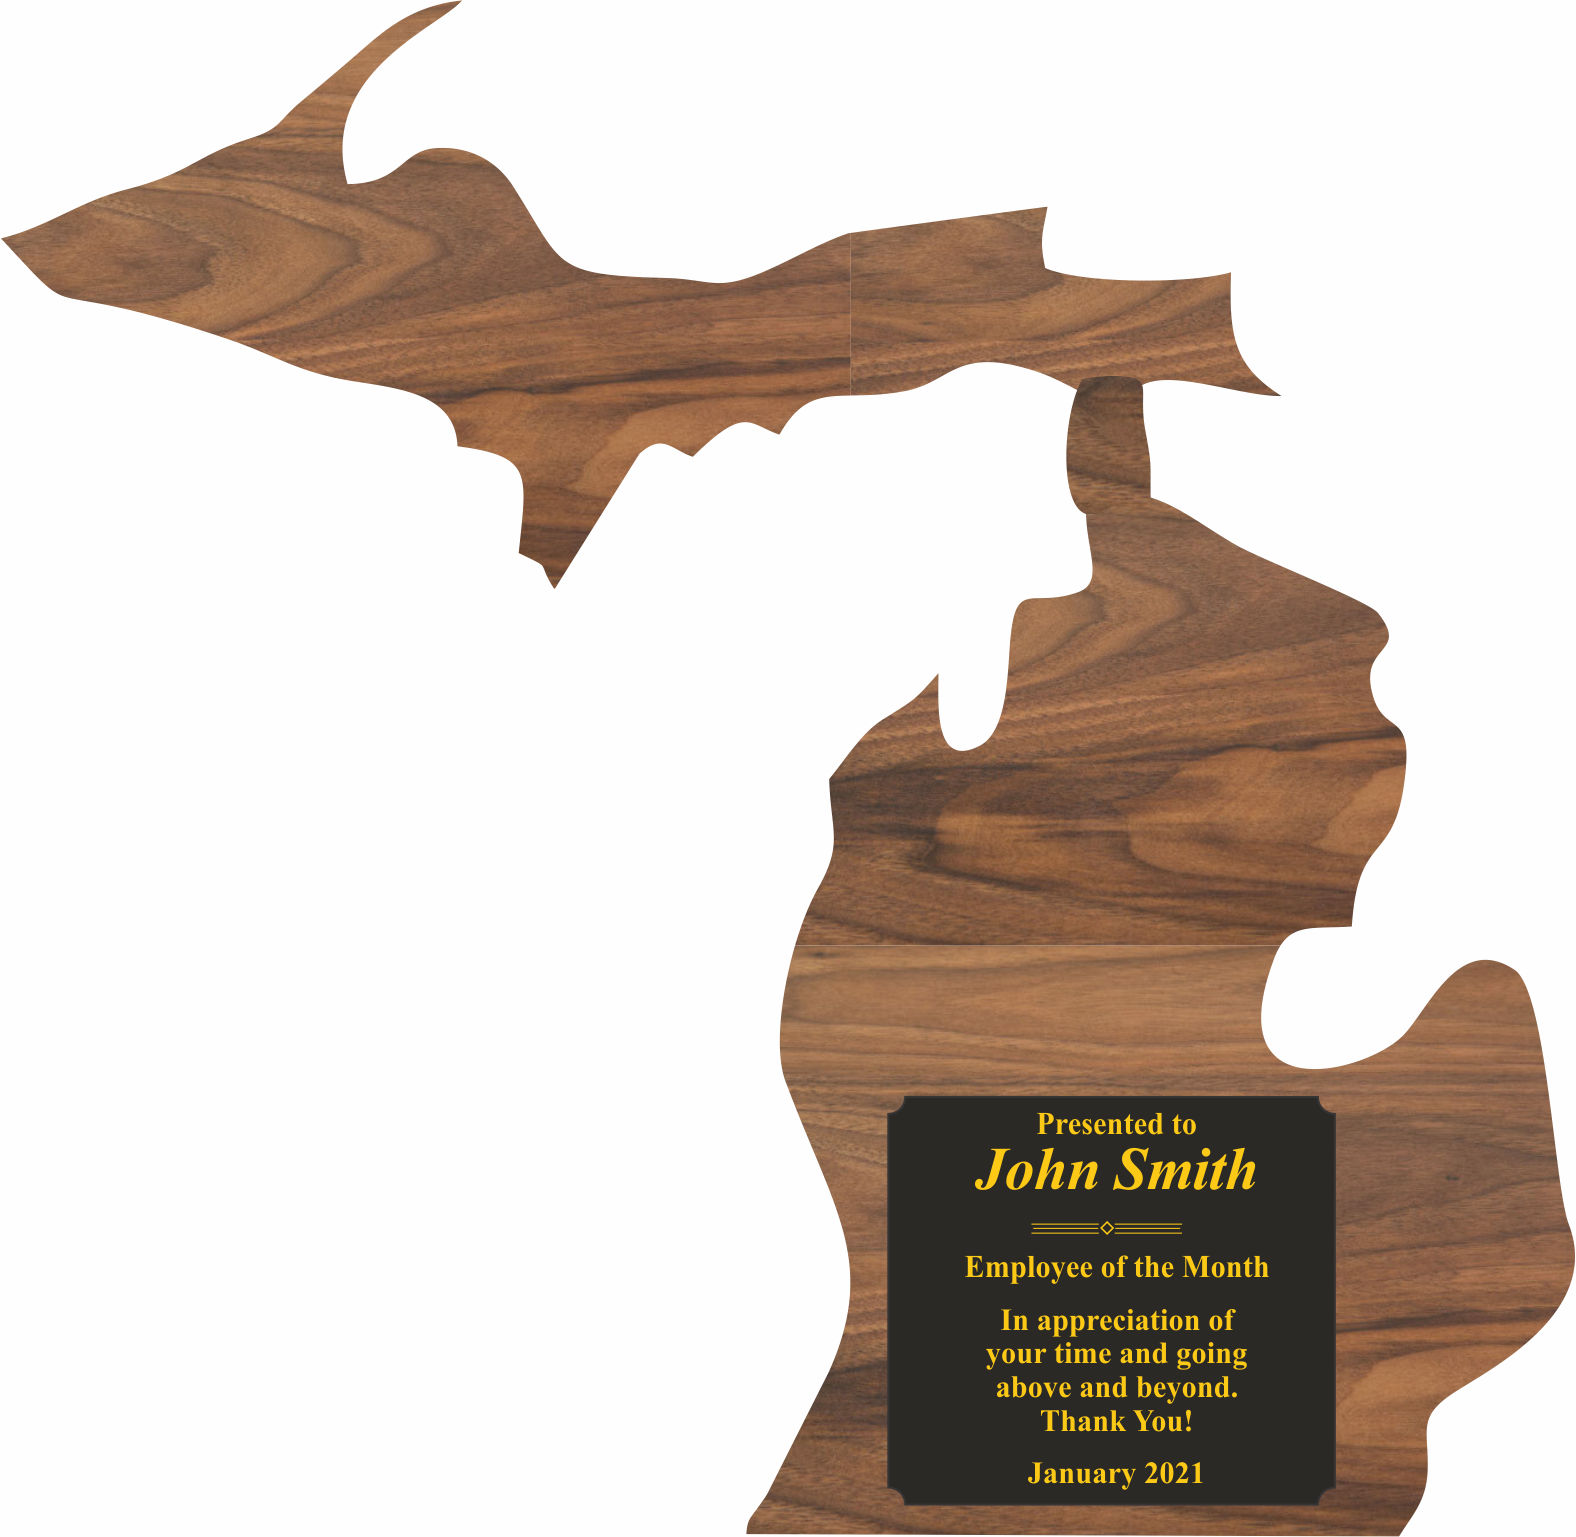 Michigan State Shaped Plaques, Custom Engraved With Your Logo!